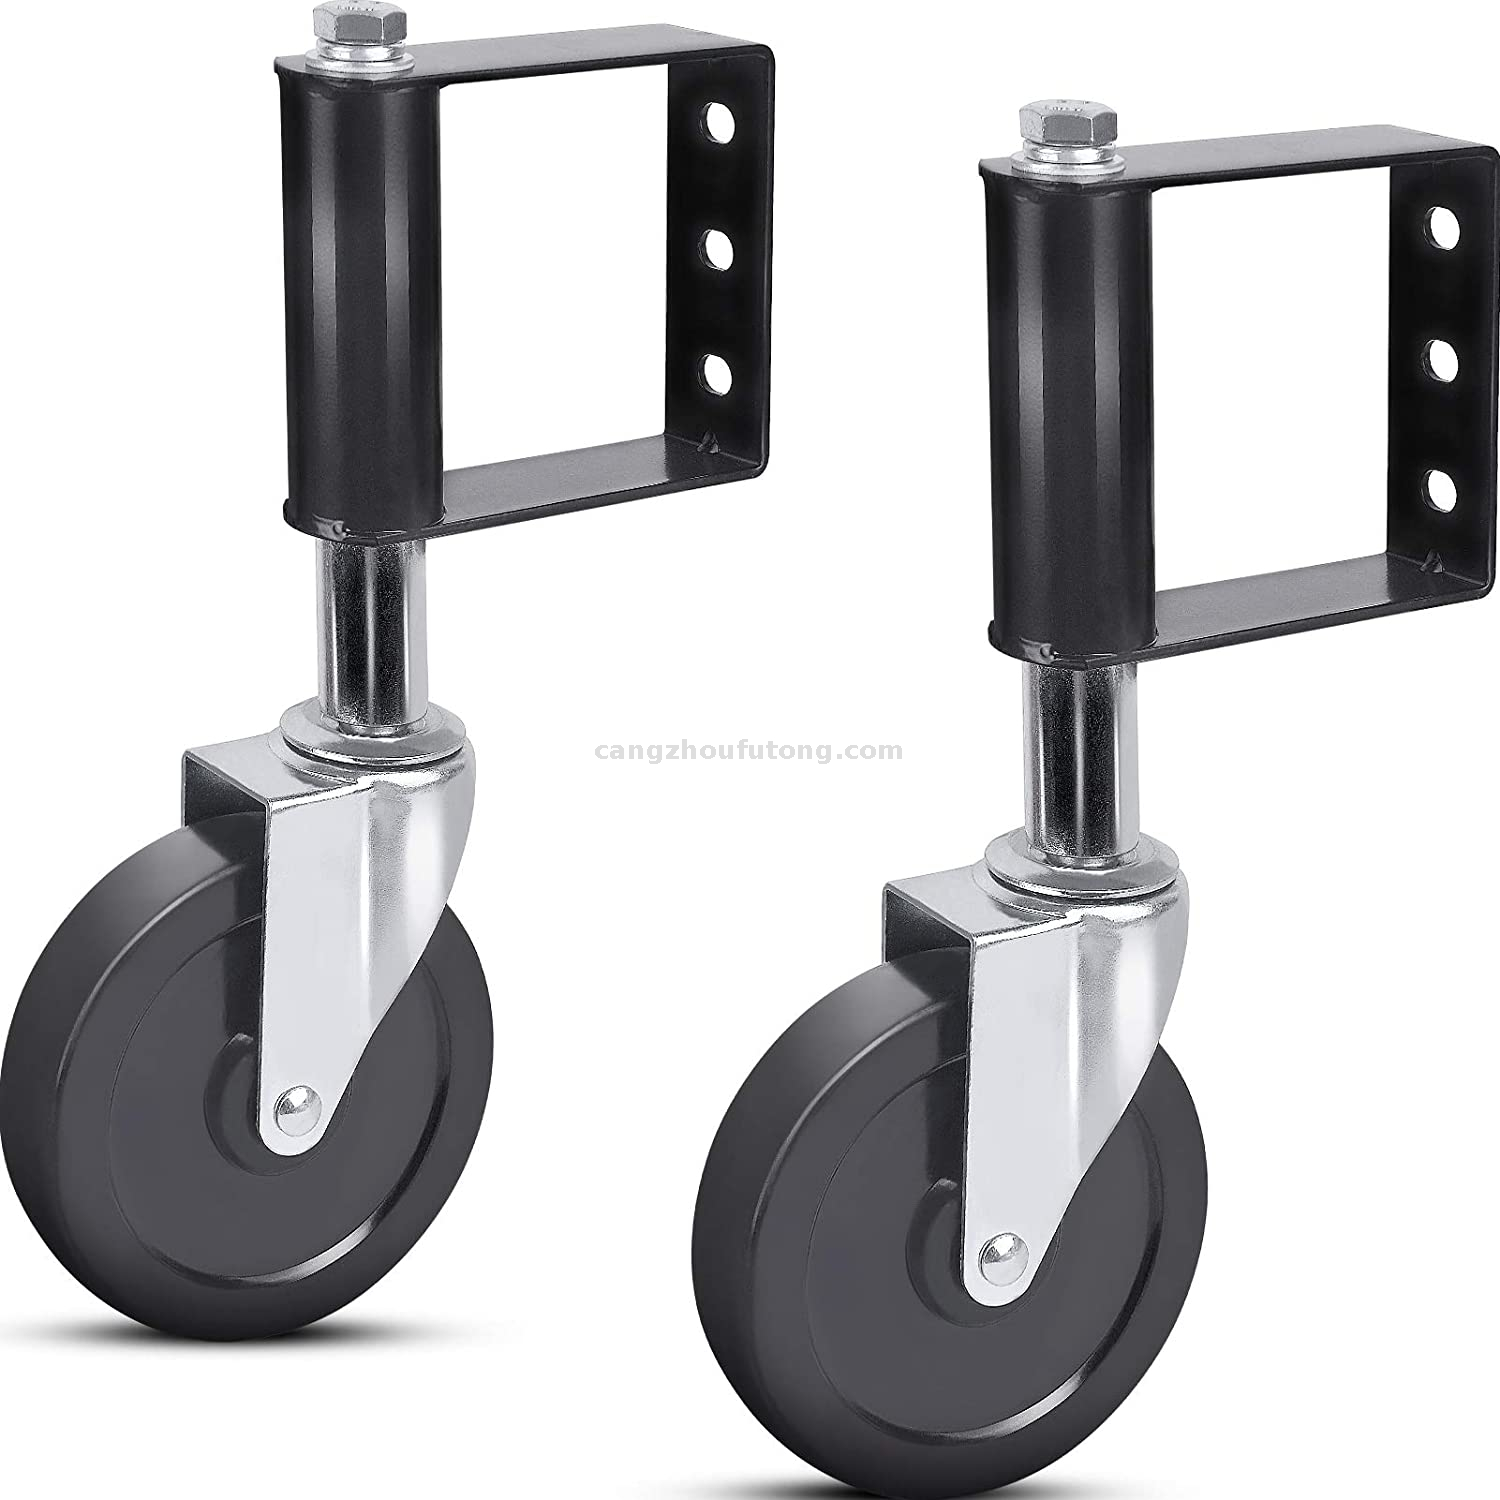 Spring Loaded Gate Casters with Universal Mount 4 Inch Hard Rubber Gate Wheel